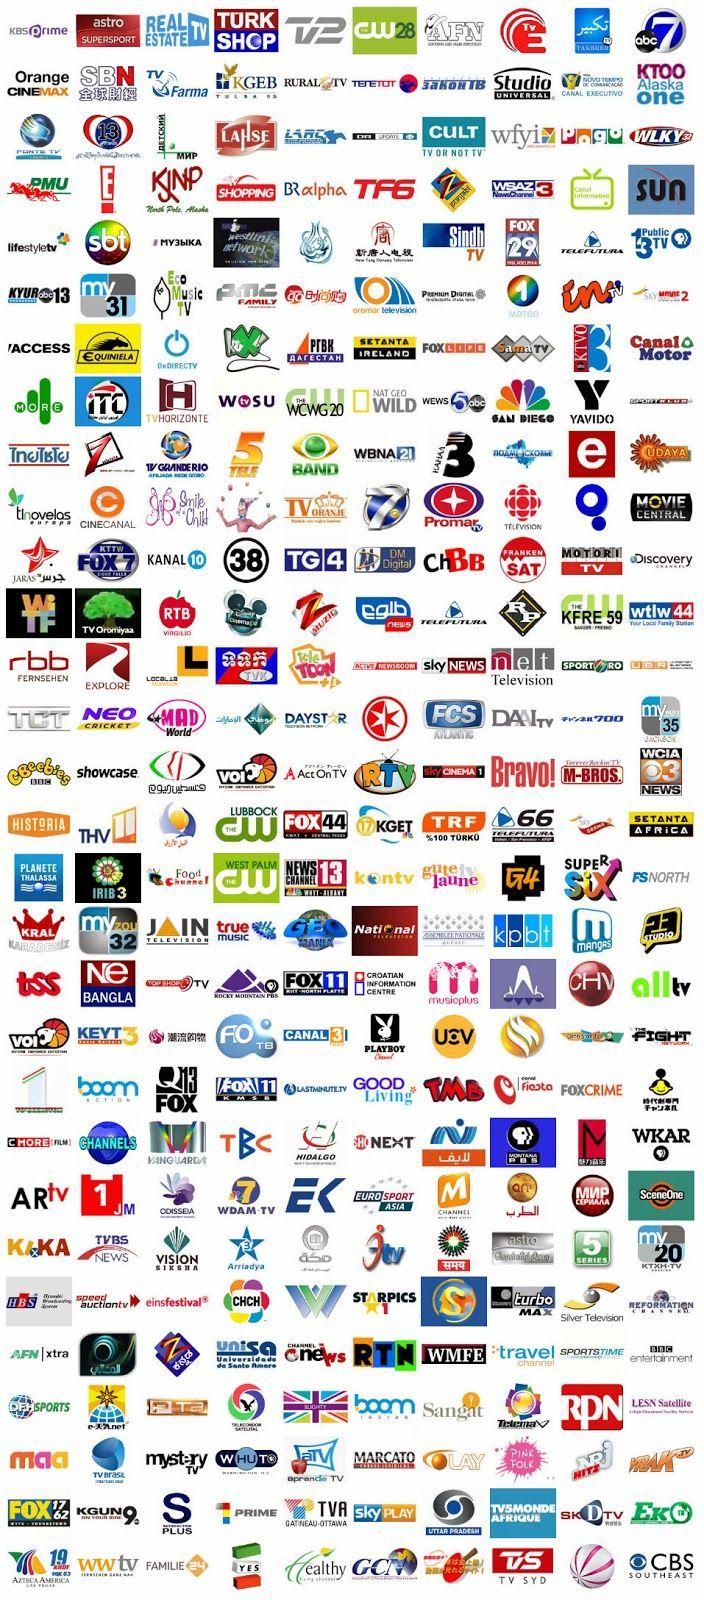 News Channel Logo - TV Channel Logos and Names. Logos. Tv channel logo